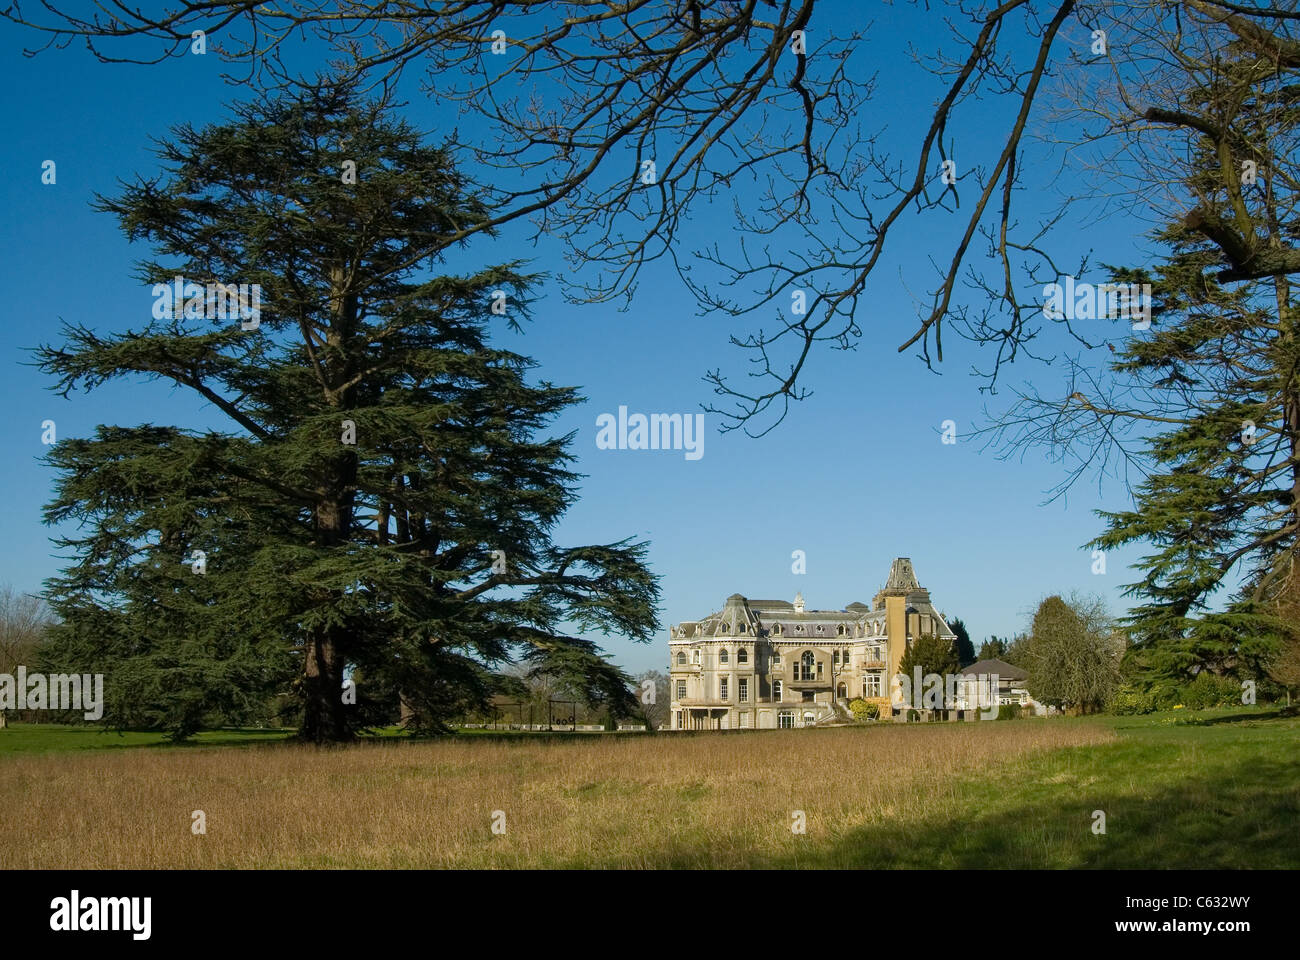 Park Place House at Remenham near Henley in Berkshire, UK in parkland setting with giant cedar tree in front of the house Stock Photo